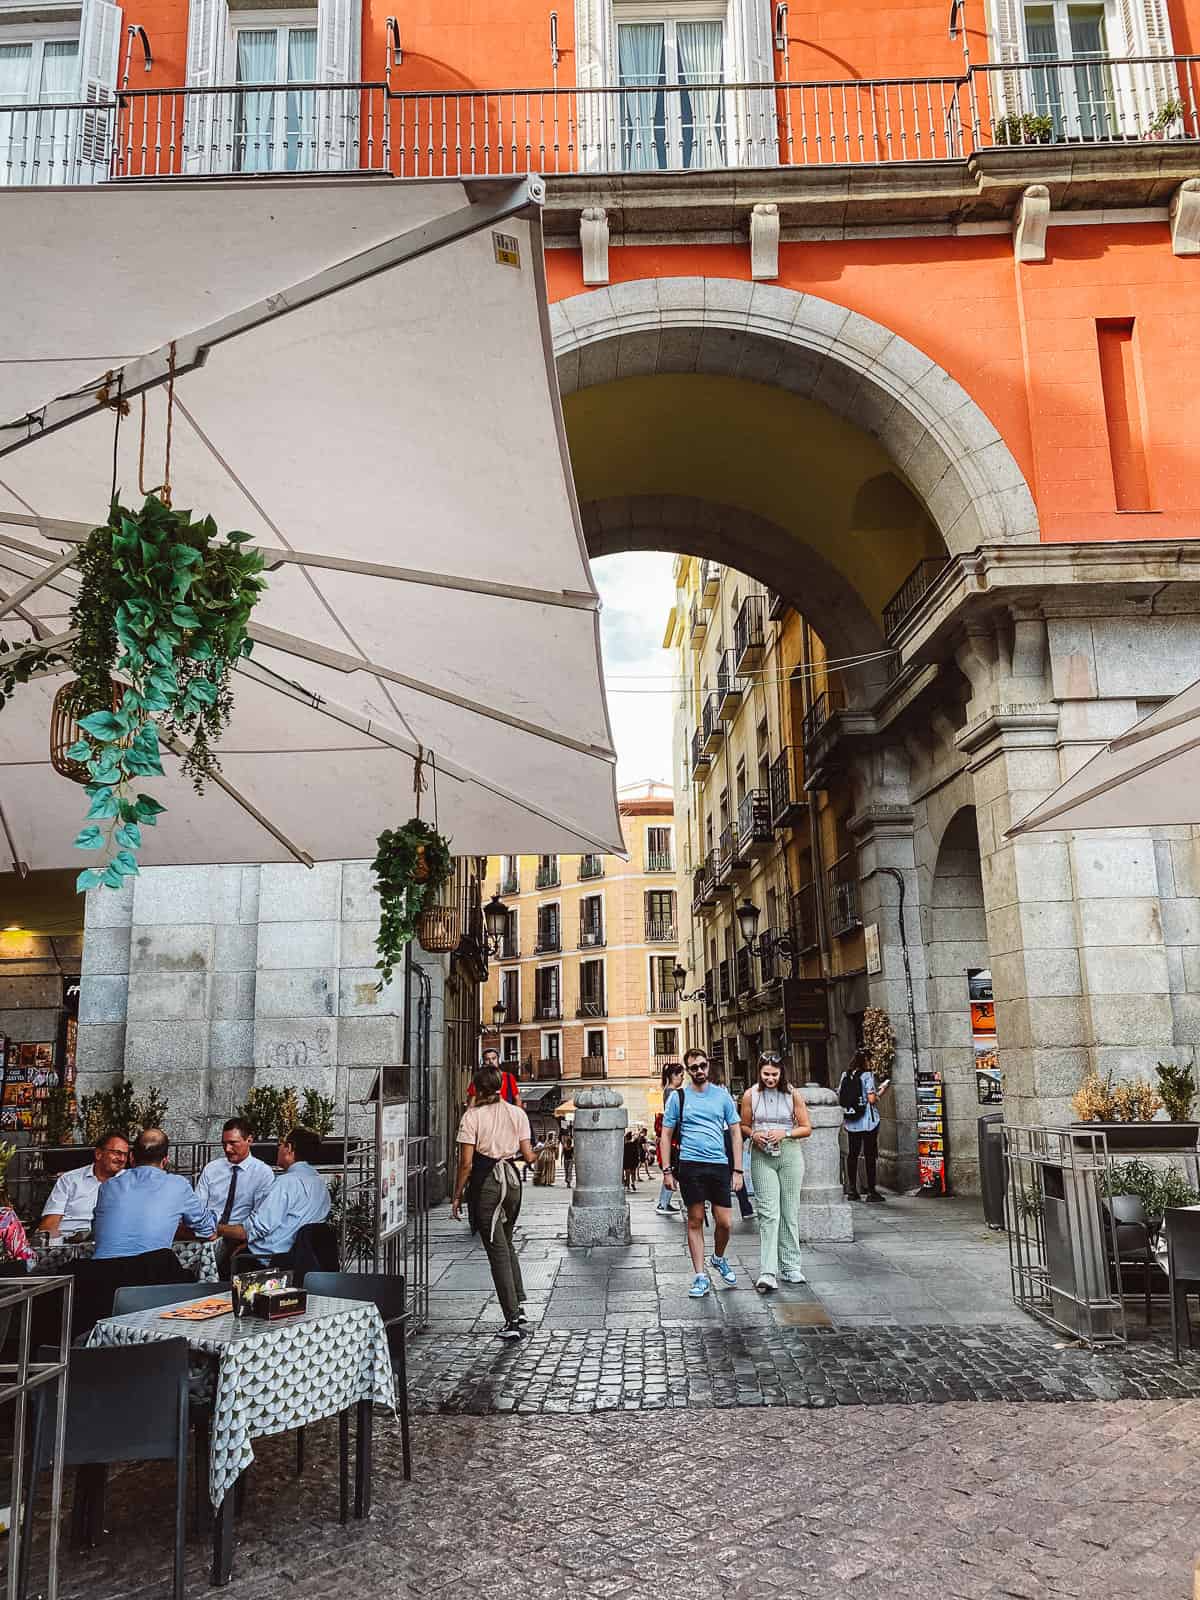 A vibrant street scene in Madrid with people walking under the arches of Plaza Mayor, outdoor seating at a café where patrons are dining, and traditional Spanish buildings with balconies overlooking the square.